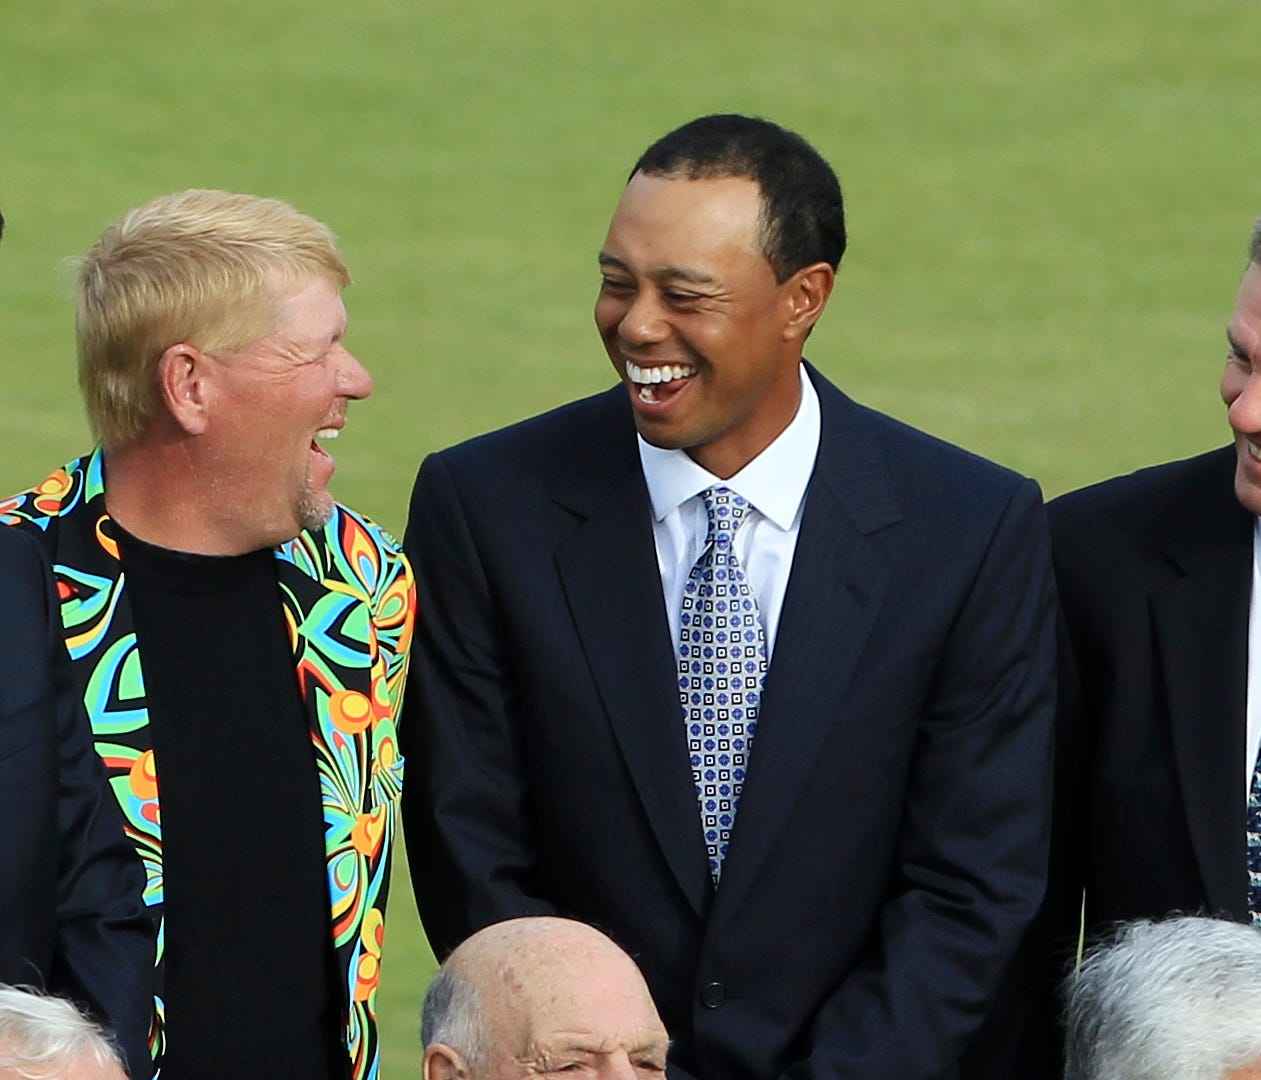 ORG XMIT: XSTA231 Former British Open Champions, from left, Padraig Harrington of Ireland, John Daly of the U.S., Tiger Woods of the U.S. and Bill Rogers of the U.S. laugh together before the group photo on the 1st tee on the Old Course at St. Andrew